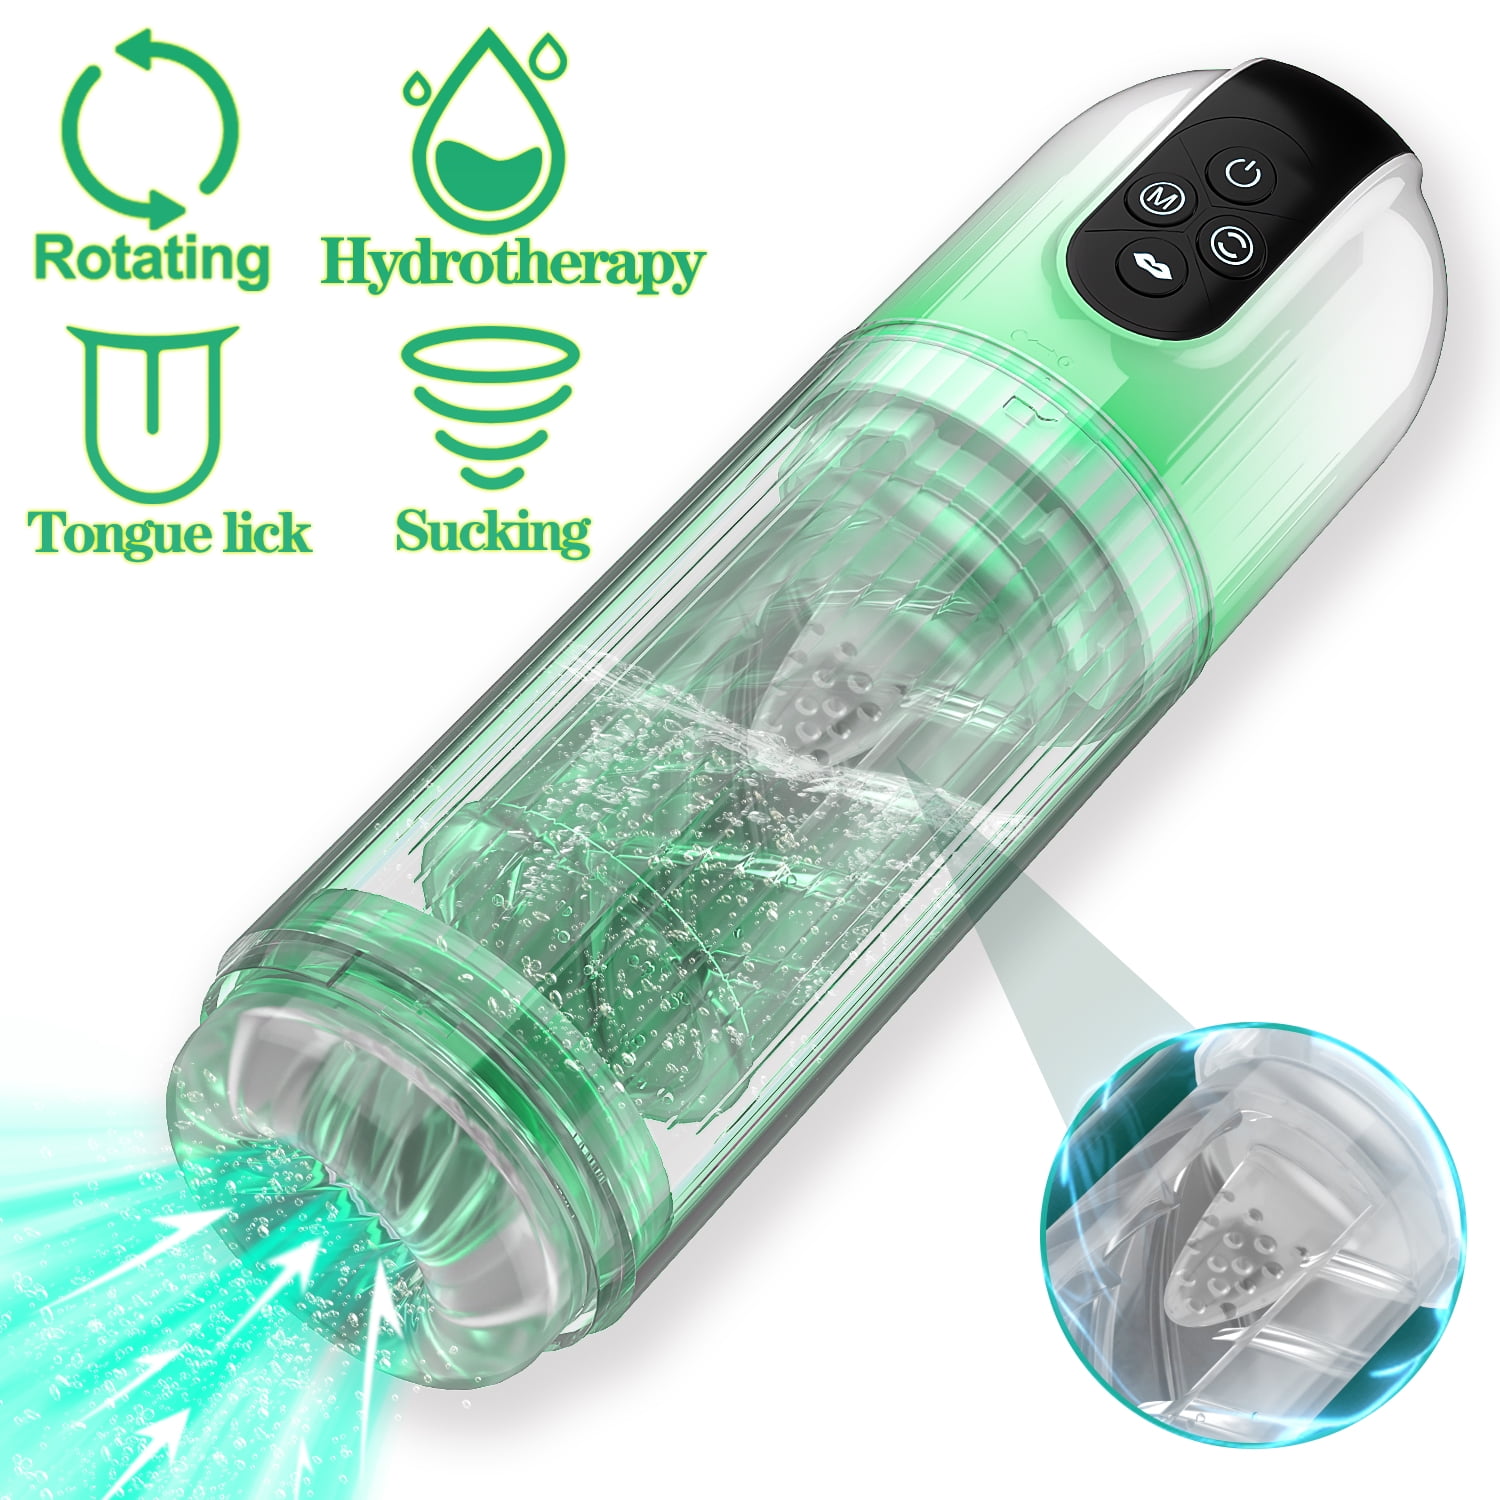 AYIYUN 2 in 1 Automatic Male Masturbator & Trainer, Fully Waterproof Male Masturbators Sex Toy with Tongue Lick Rotation & Suction Modes, Stroker Adult Male Sex Toys for men